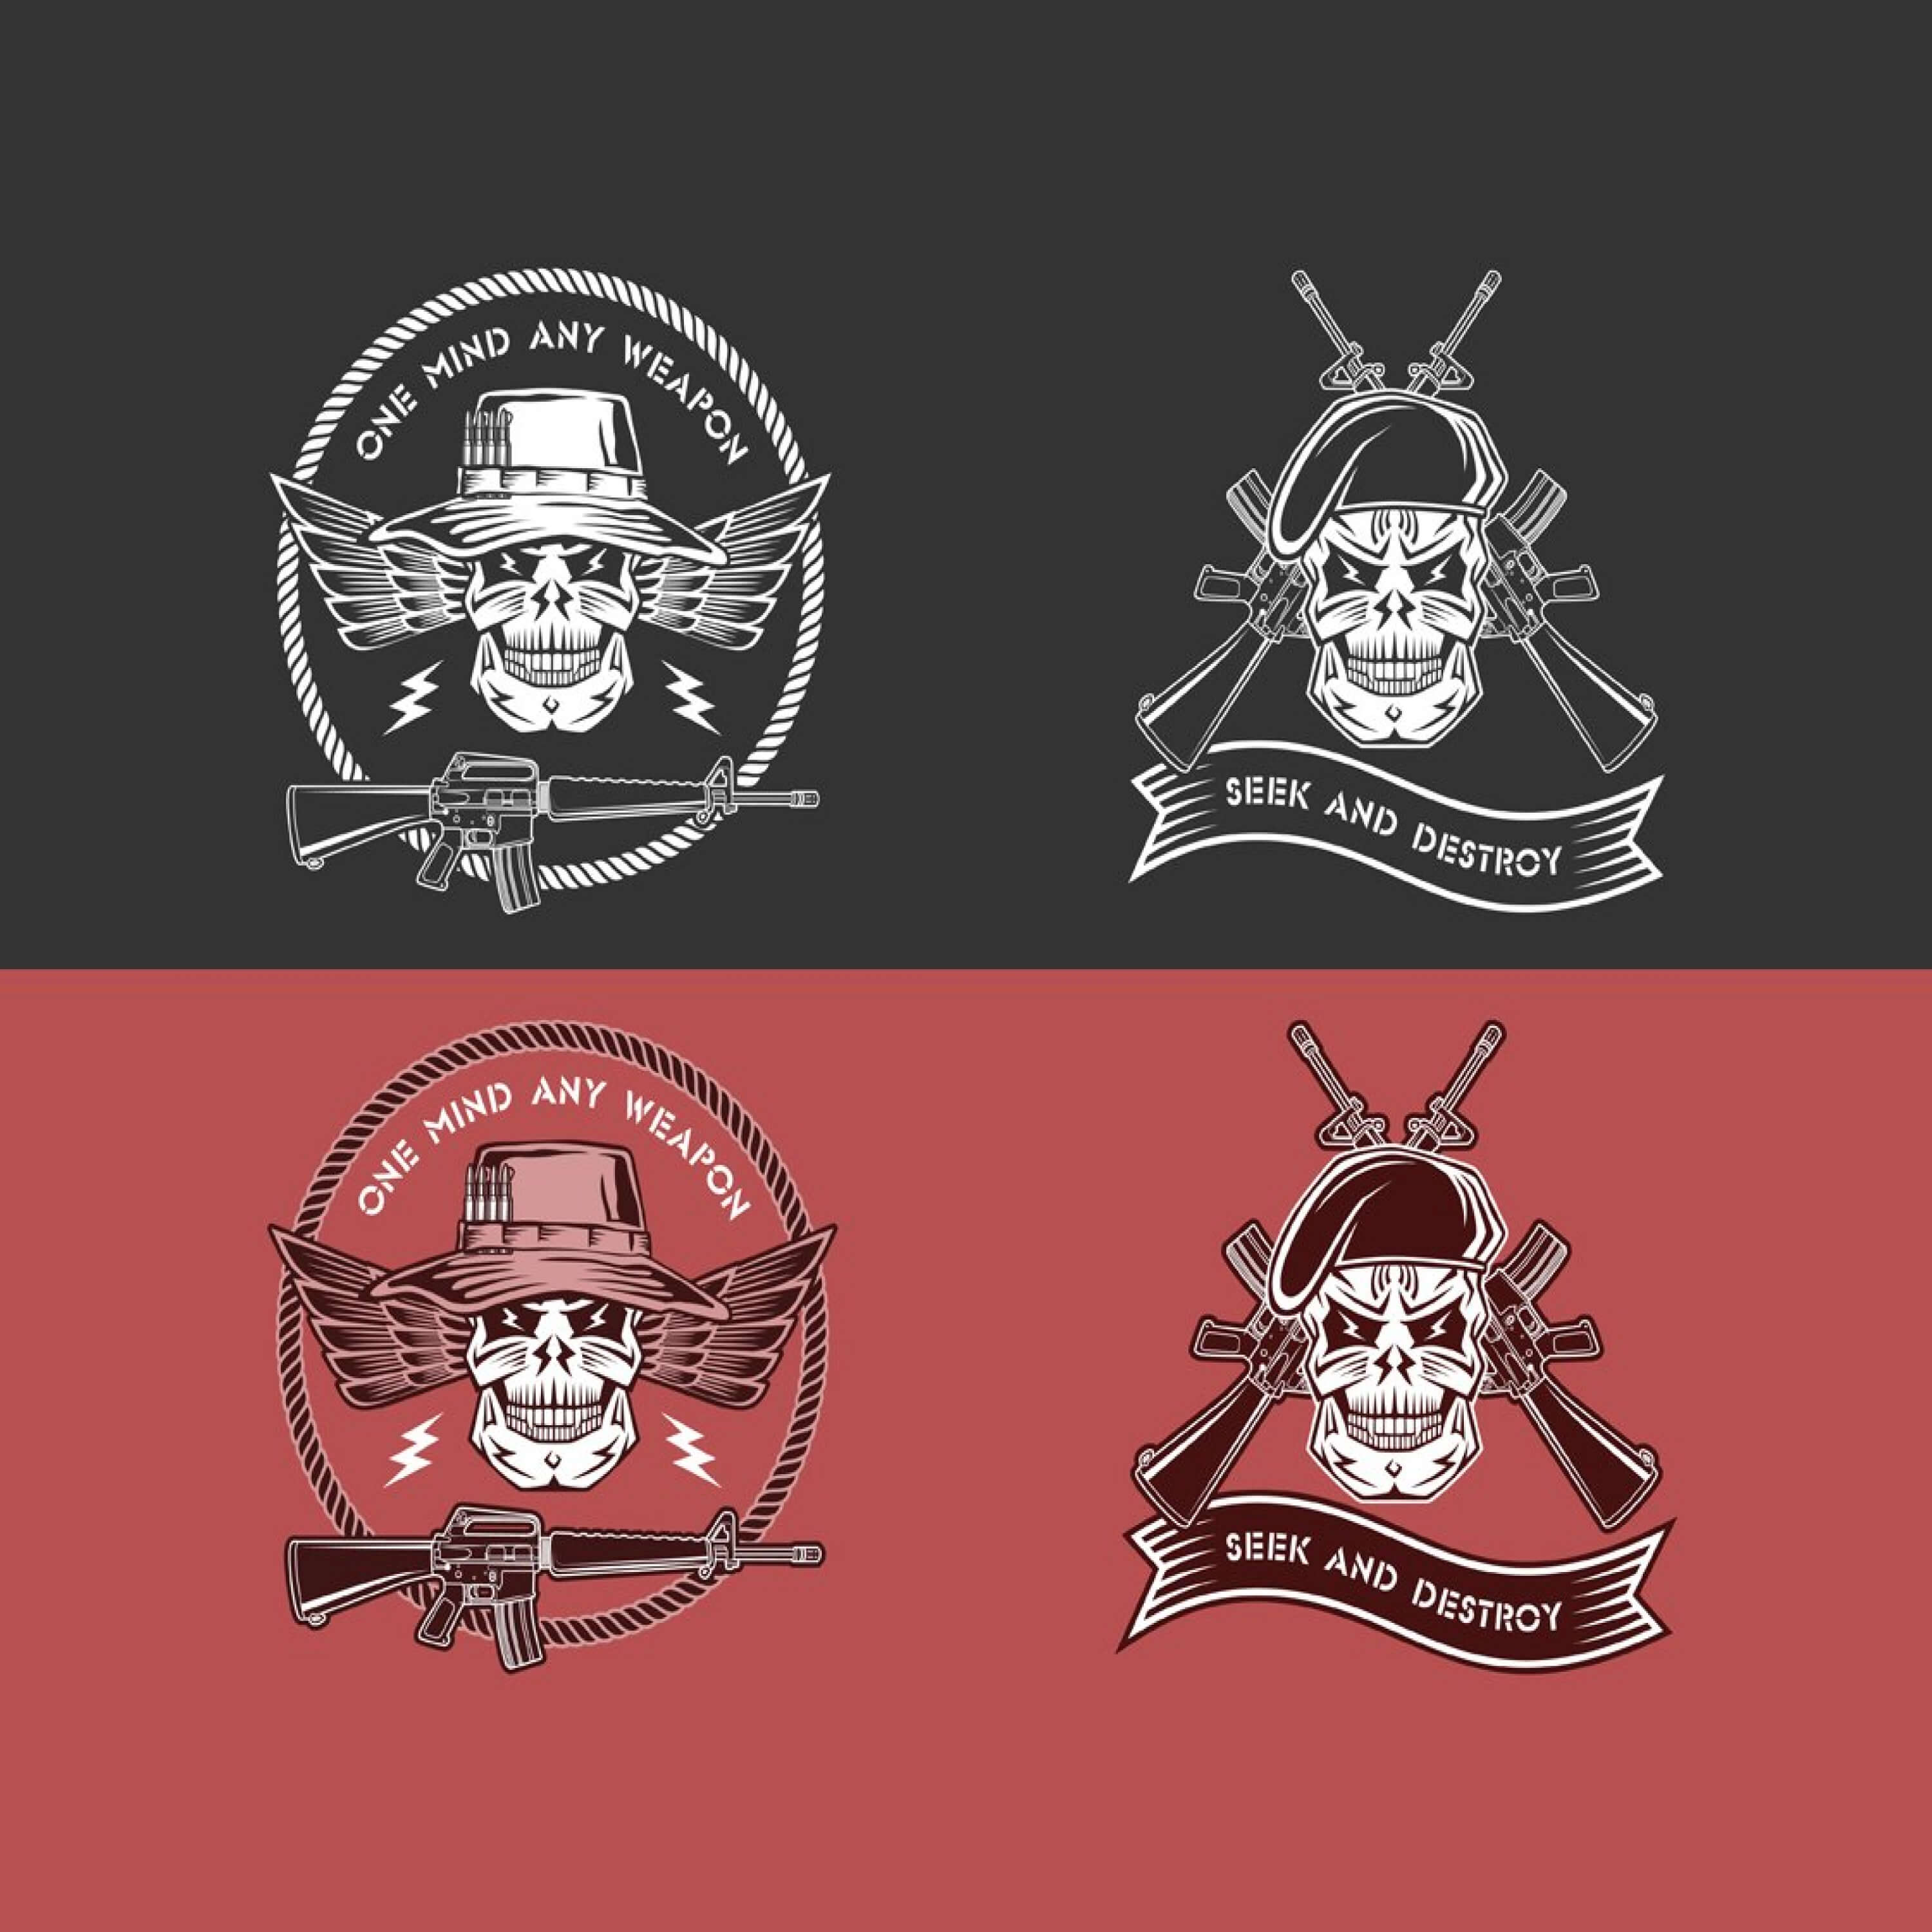 Military emblems with inscription "One mind any weapon".